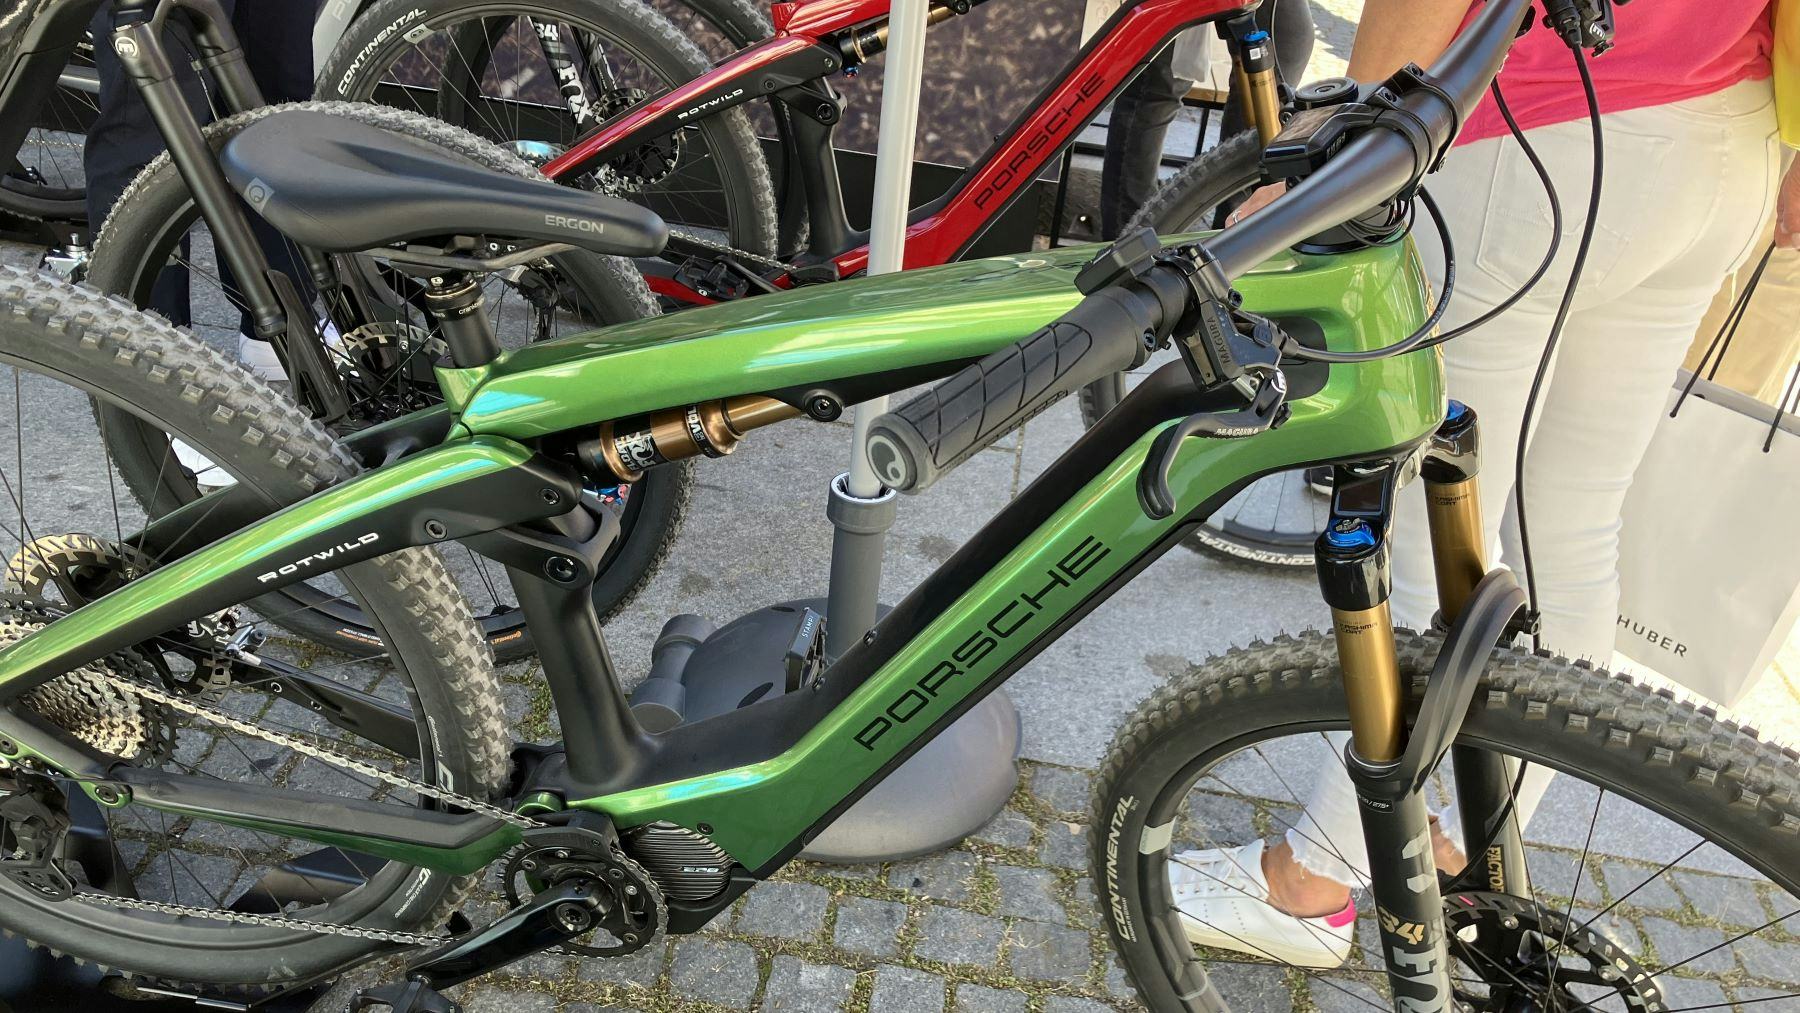 Porsche e-bikes on display at IAA Mobility this month, but the company now announces it will be focusing on the core business of the development and production of e-bike drive systems. – Photo Bike Europe